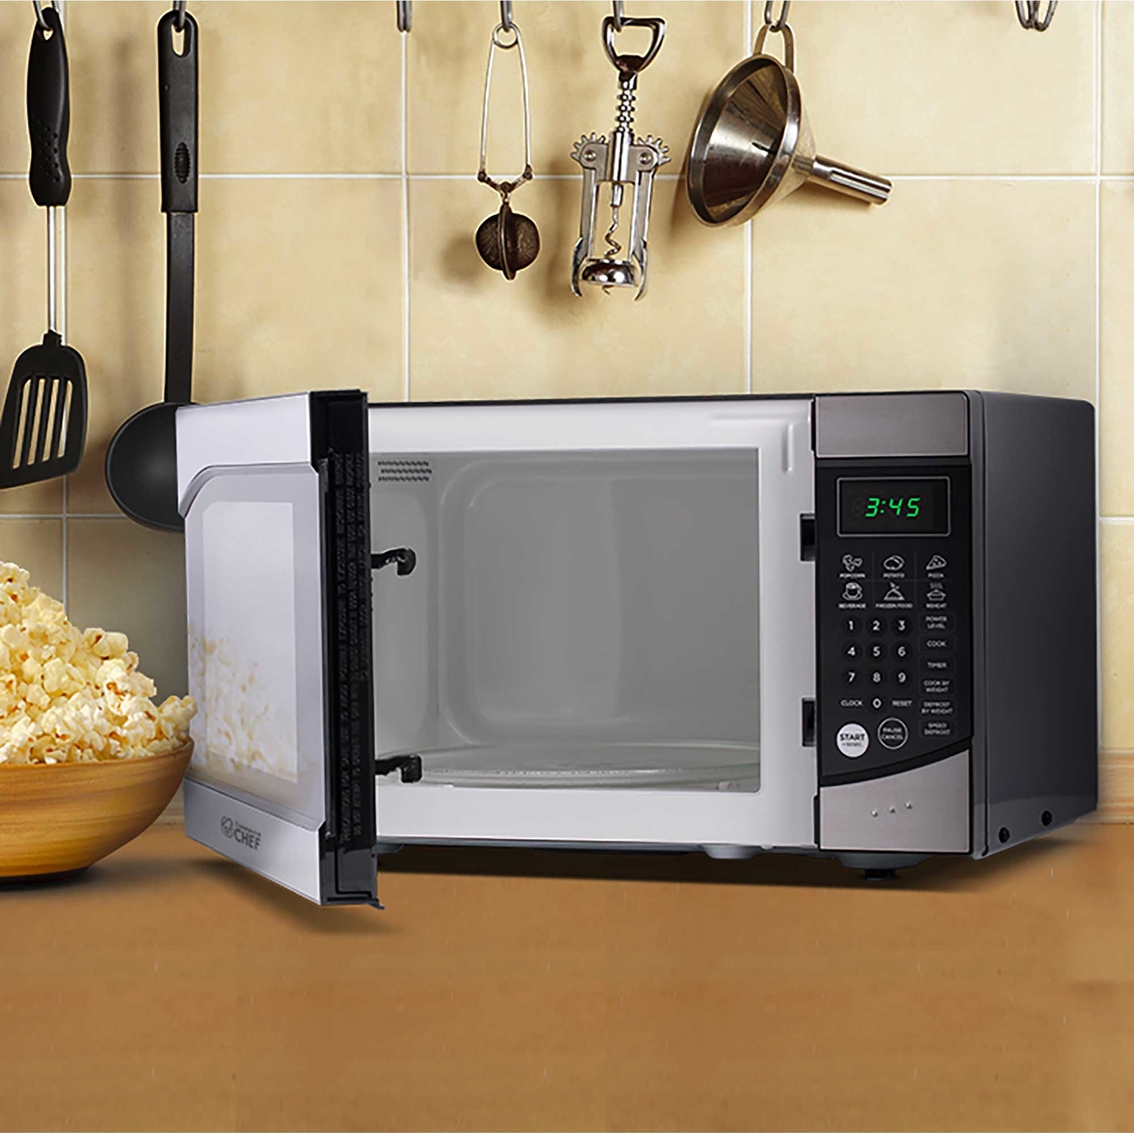 Commercial Chef .9 cu. ft. Counter Top Microwave - Image 8 of 8